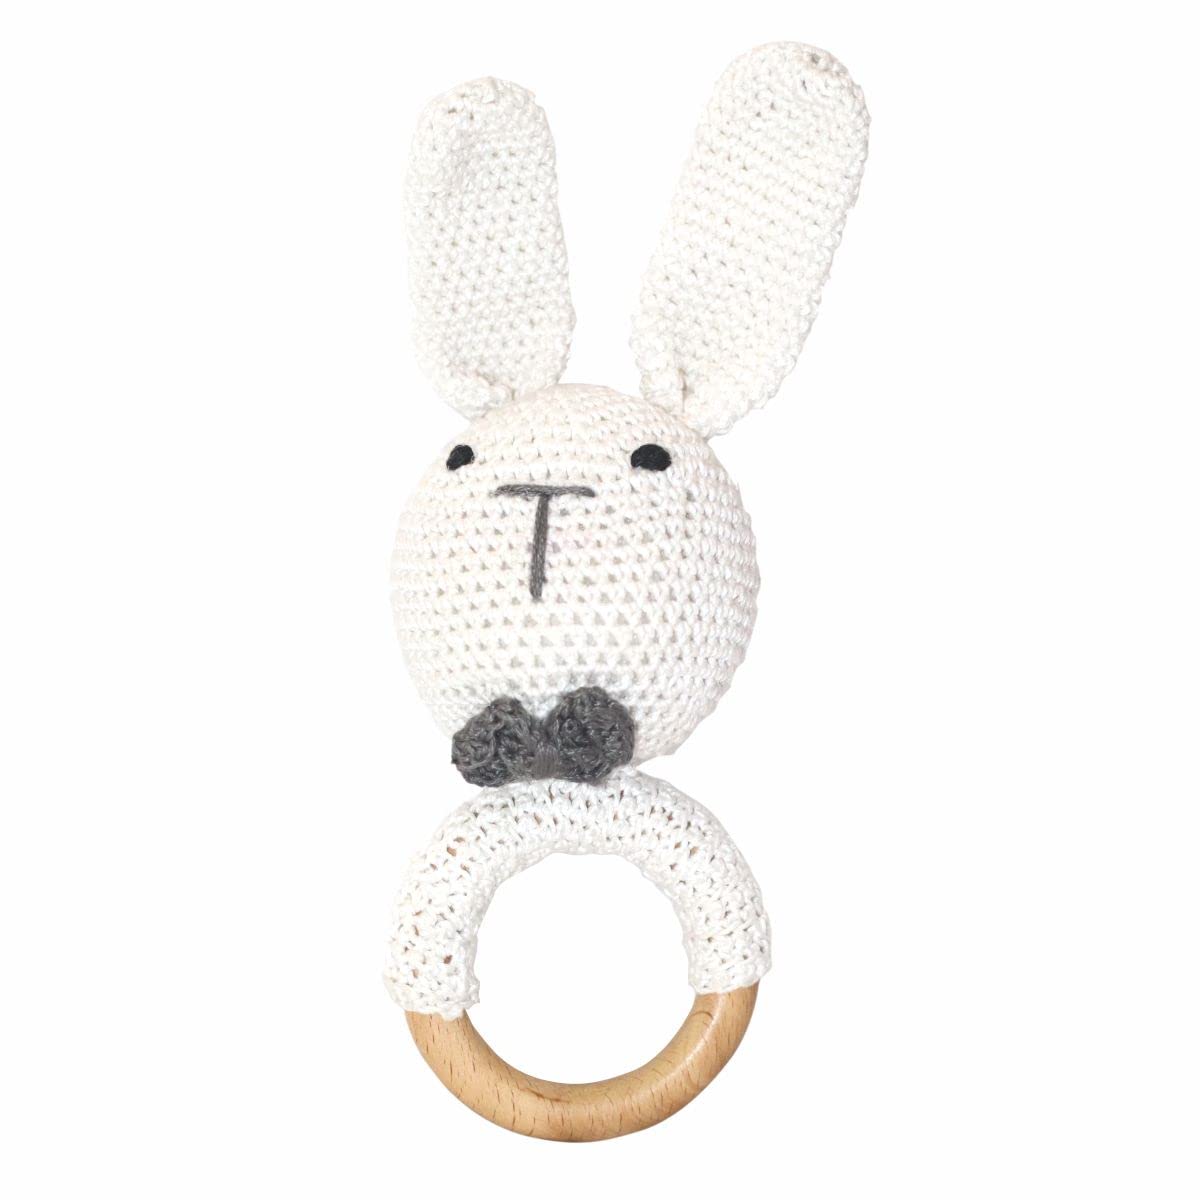 Clapjoy Handmade Crochet Bunny Ring Rattle Toy for 0-6 Babies | Teething Toy